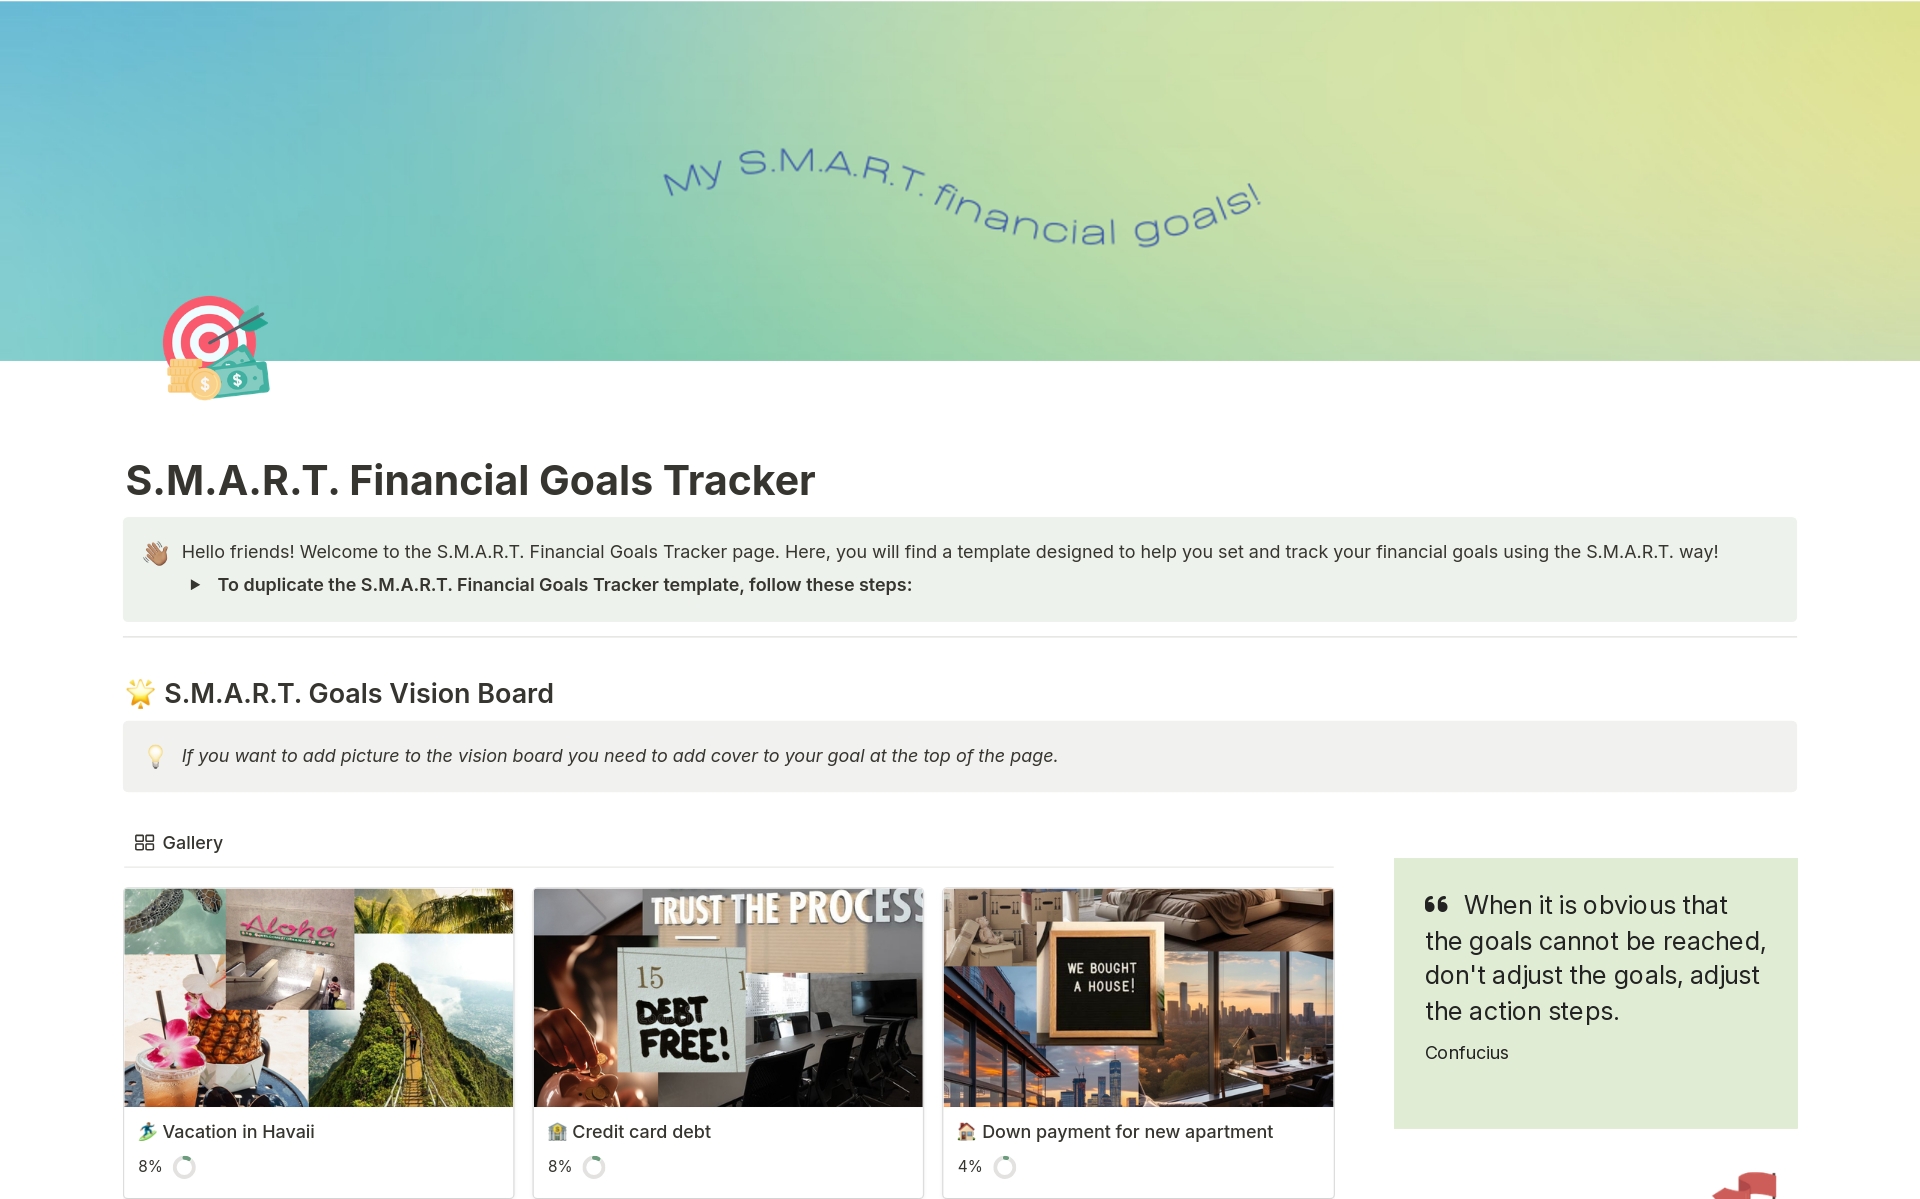 This Notion template, the S.M.A.R.T. Financial Goals Tracker, is designed to help users set, track, and achieve their financial goals using the S.M.A.R.T (Specific, Measurable, Achievable, Relevant, and Time-bound) approach. 